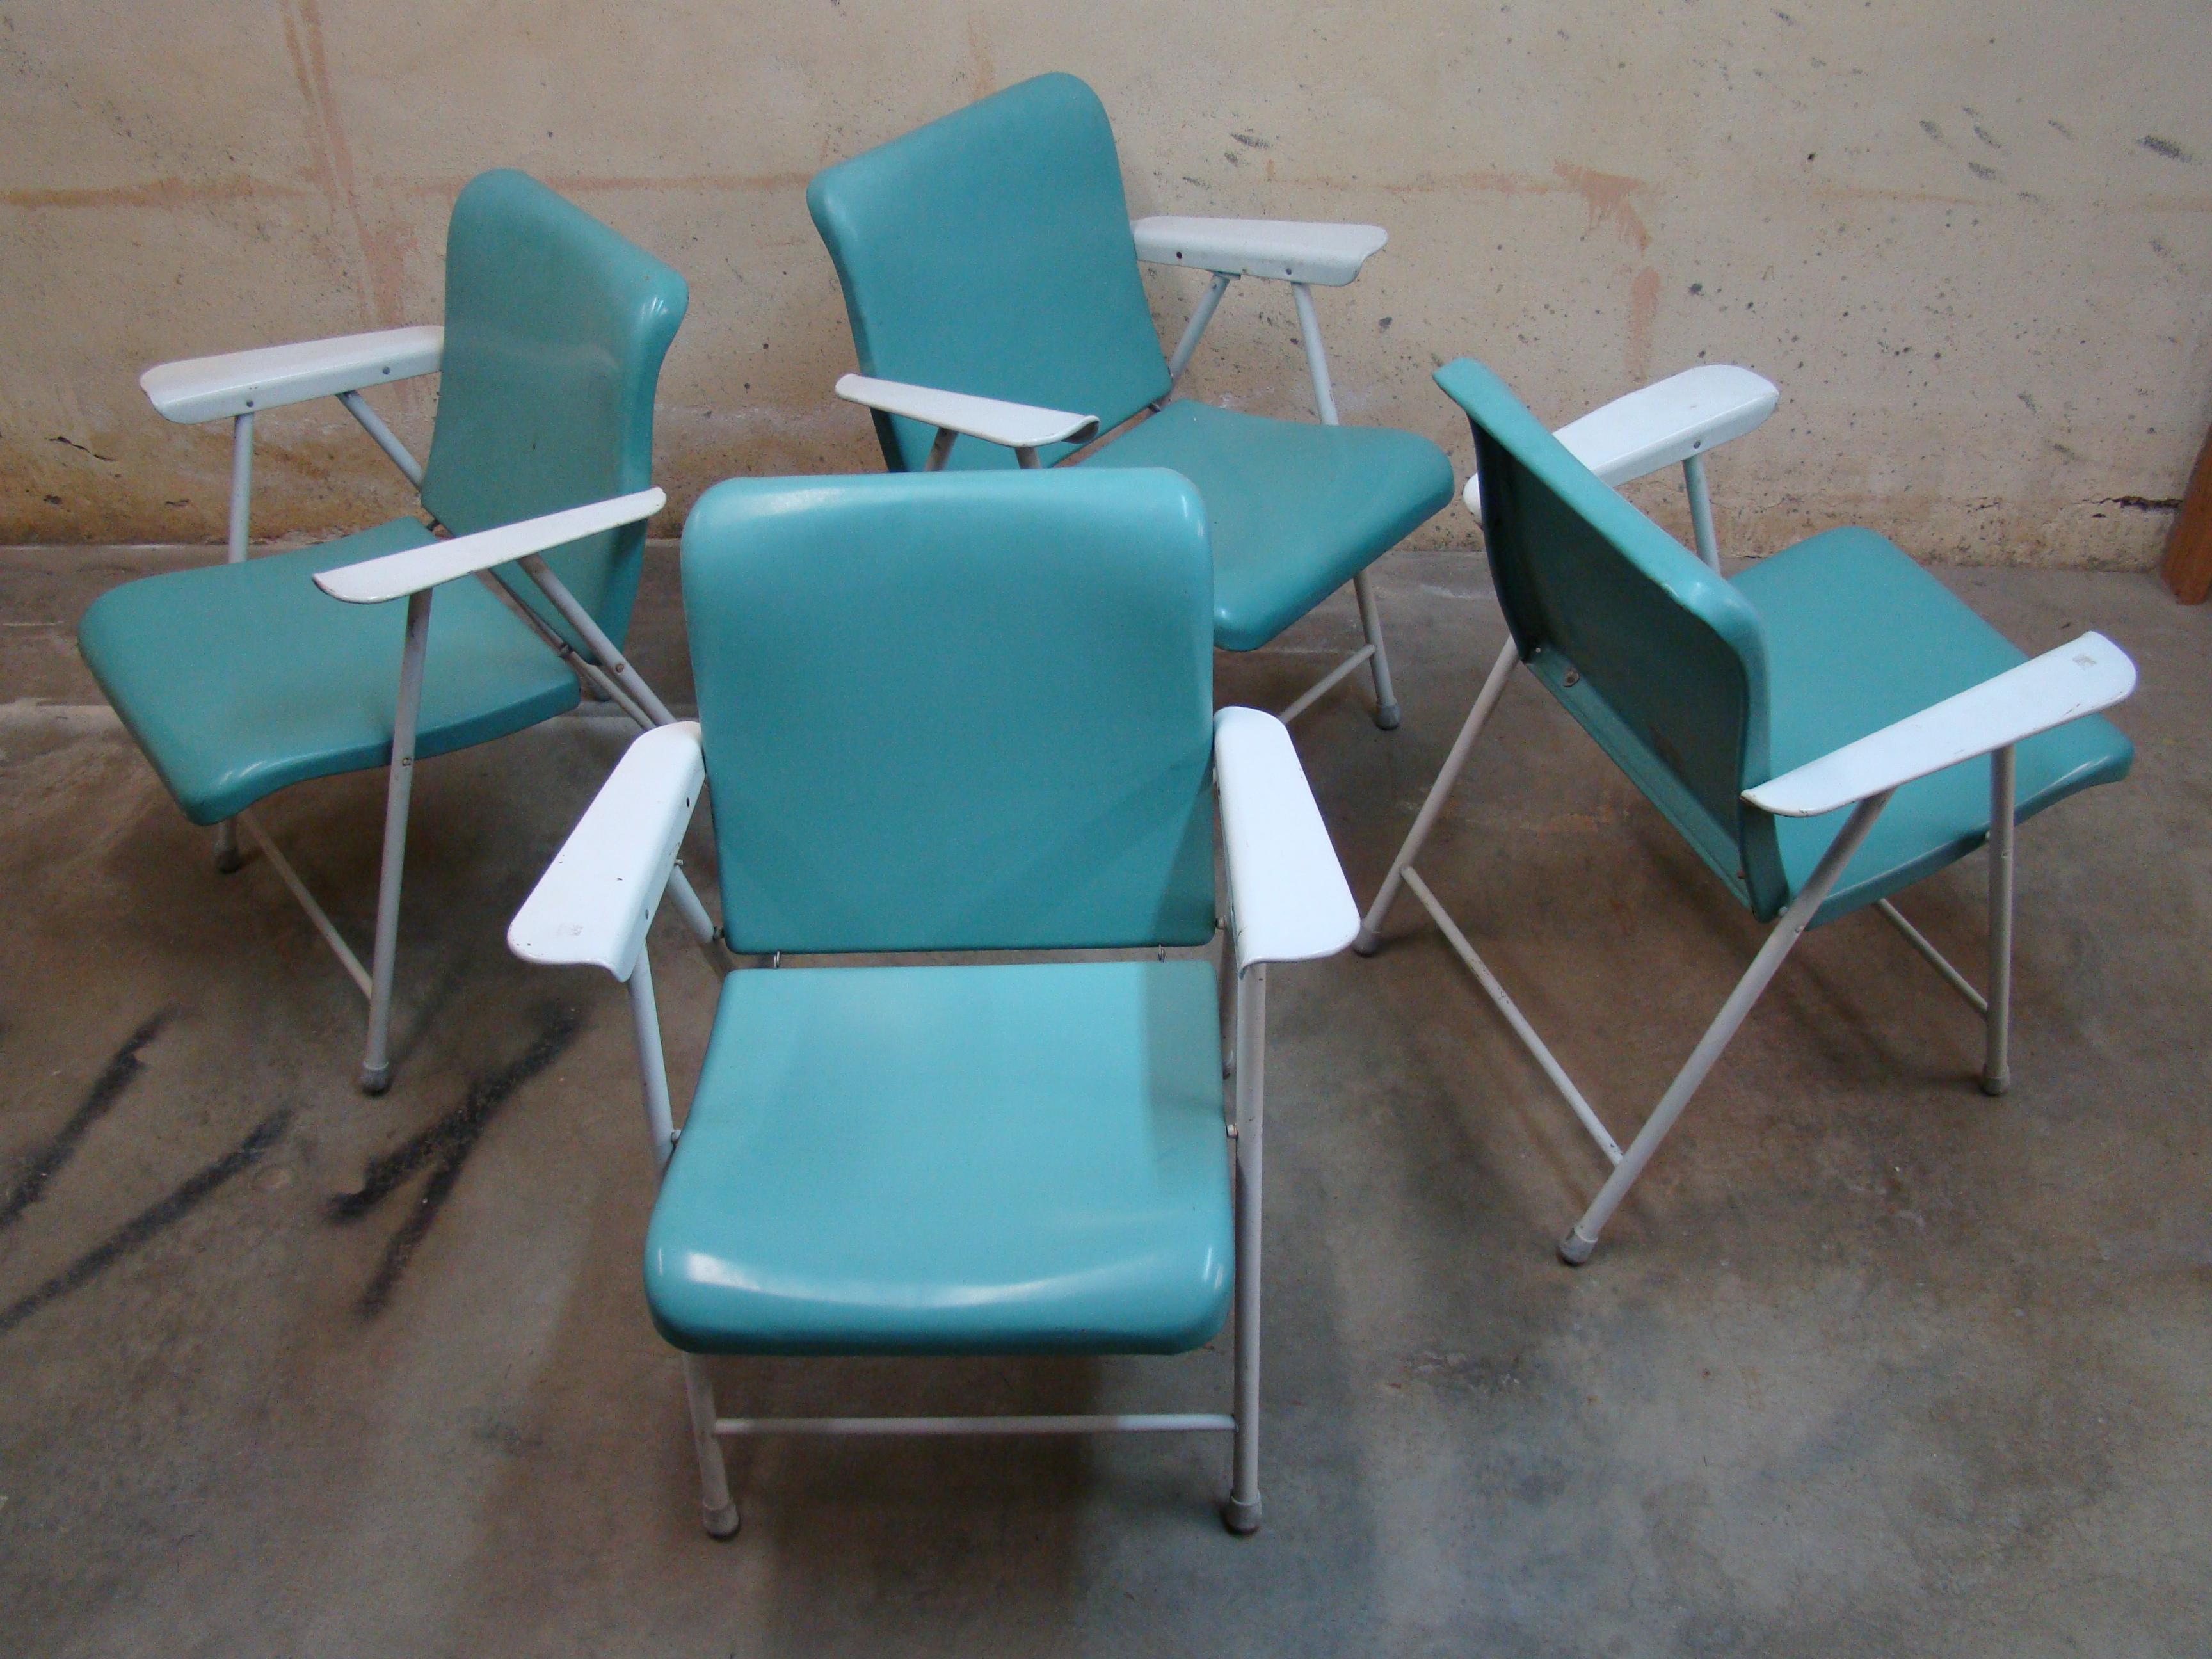 russel wright folding metal chairs